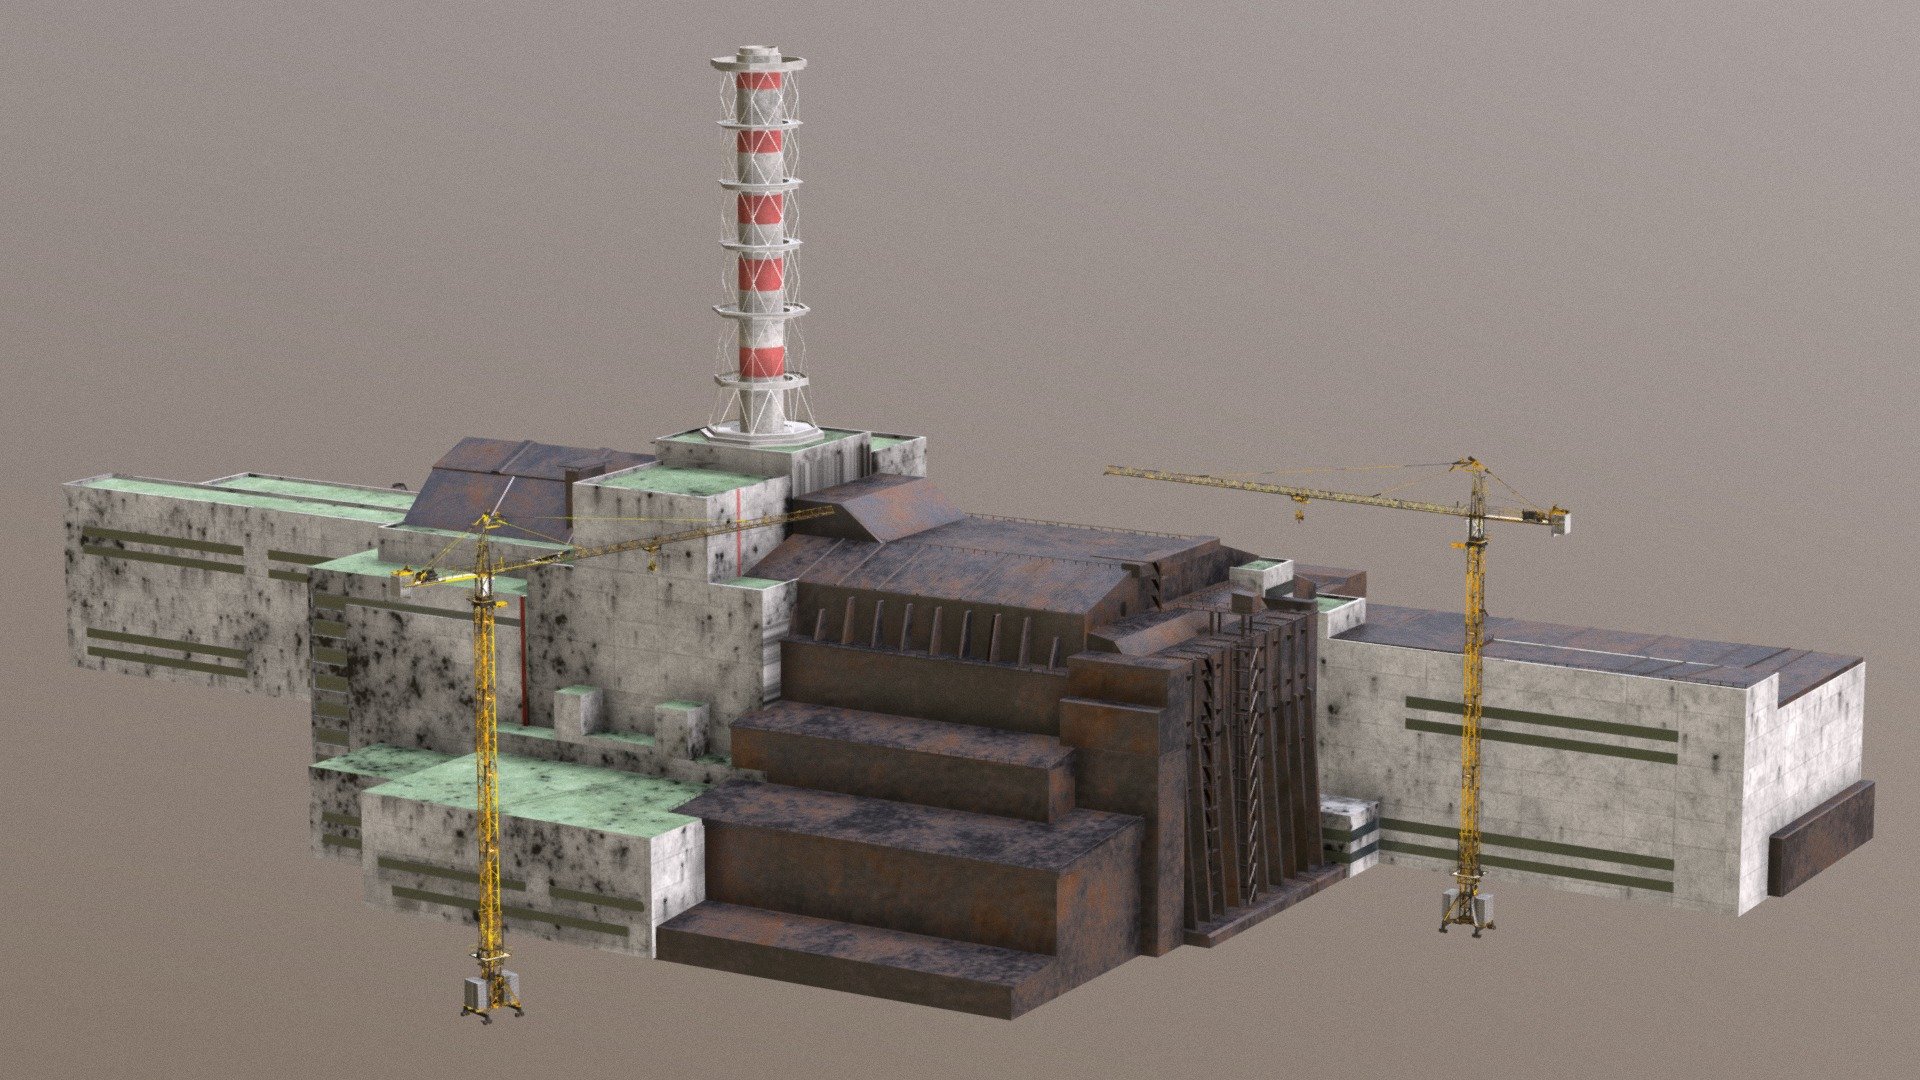 Chernobyl Nuclear Power Plant 3. and 4. sarkofag
Game ready model for unreal, unity engine. For scenes, videos, games.
4k PBR  textures in substance painter. Albedo, Metalic + rougness, Normal map. 
gizmos ready. You need somting ? PM me =)
ready for 3D printing - Chernobyl Nuclear Power Plant 3. and 4. sarkofag - Buy Royalty Free 3D model by Thomas Binder (@bindertom61) 3d model